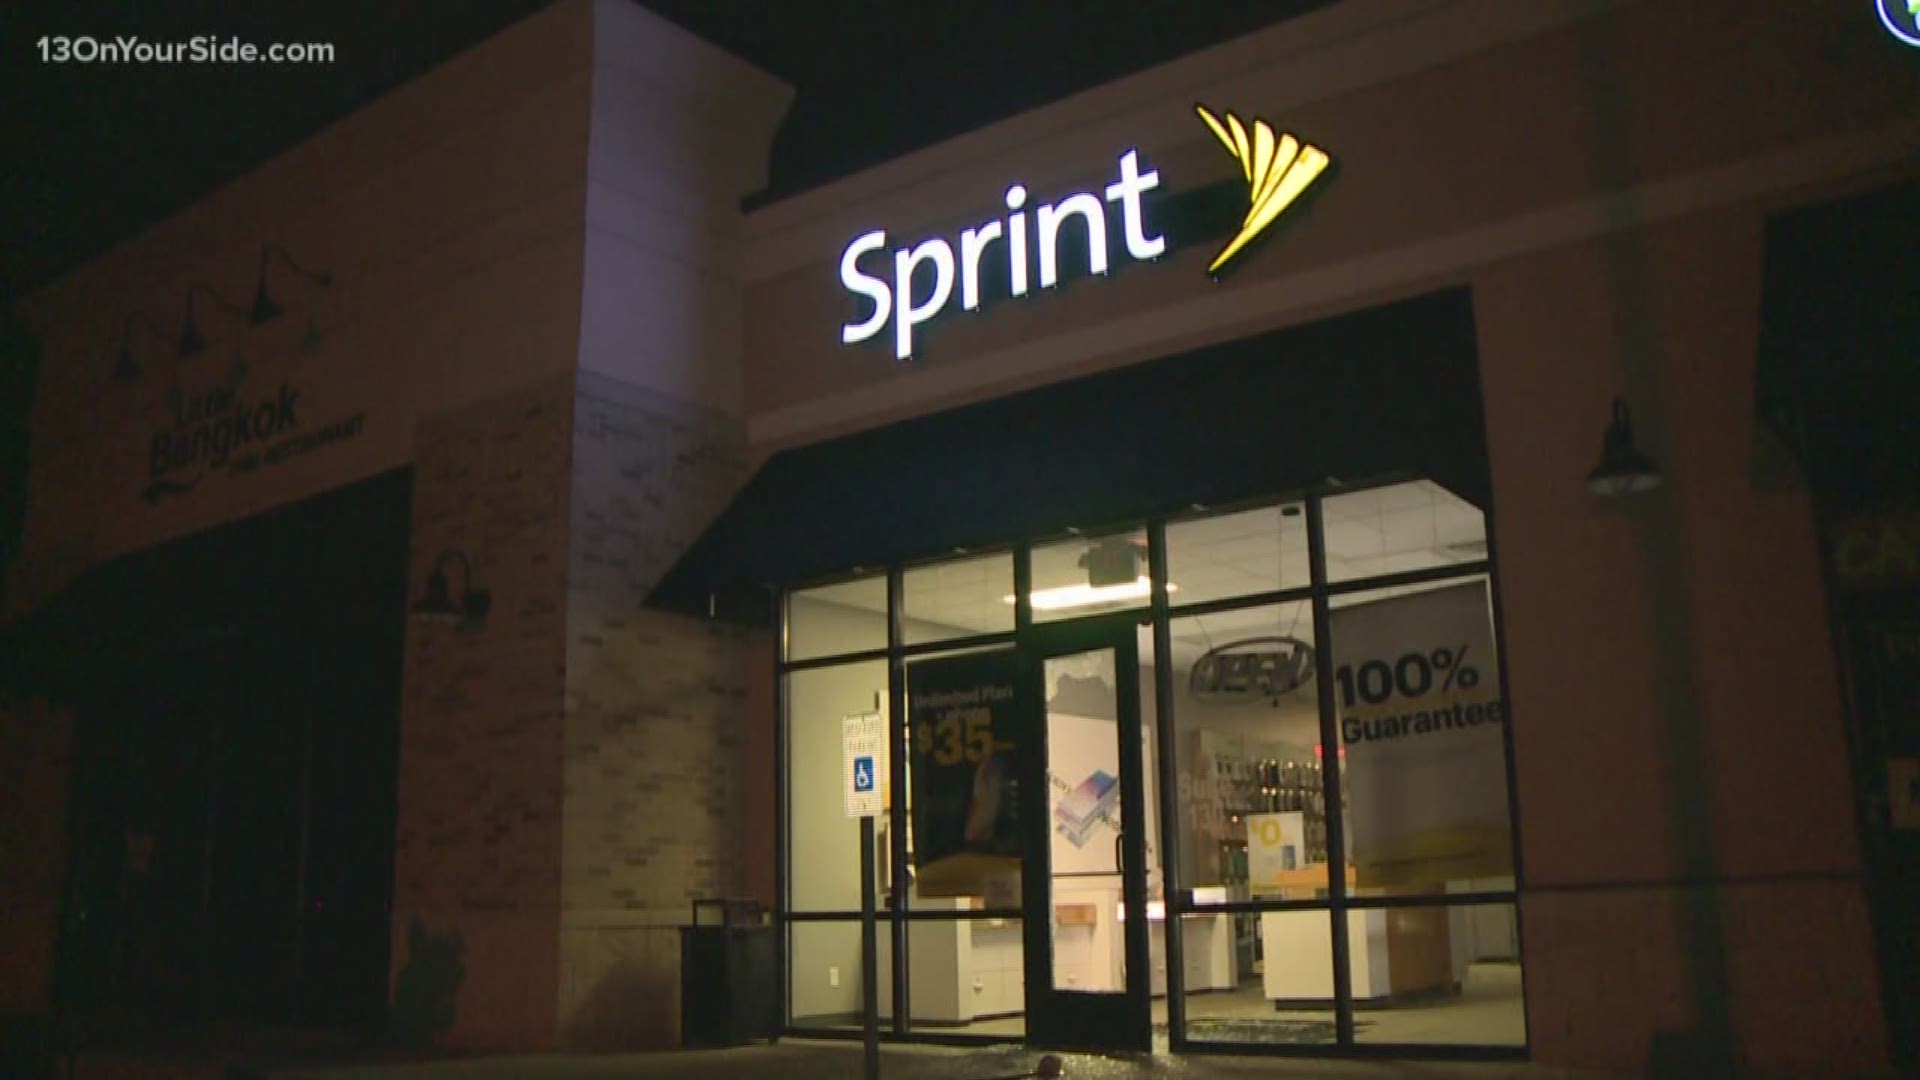 The break in at a Sprint store in Wyoming early Thursday morning was the thirteenth west Michigan cell phone store burglary in three weeks.